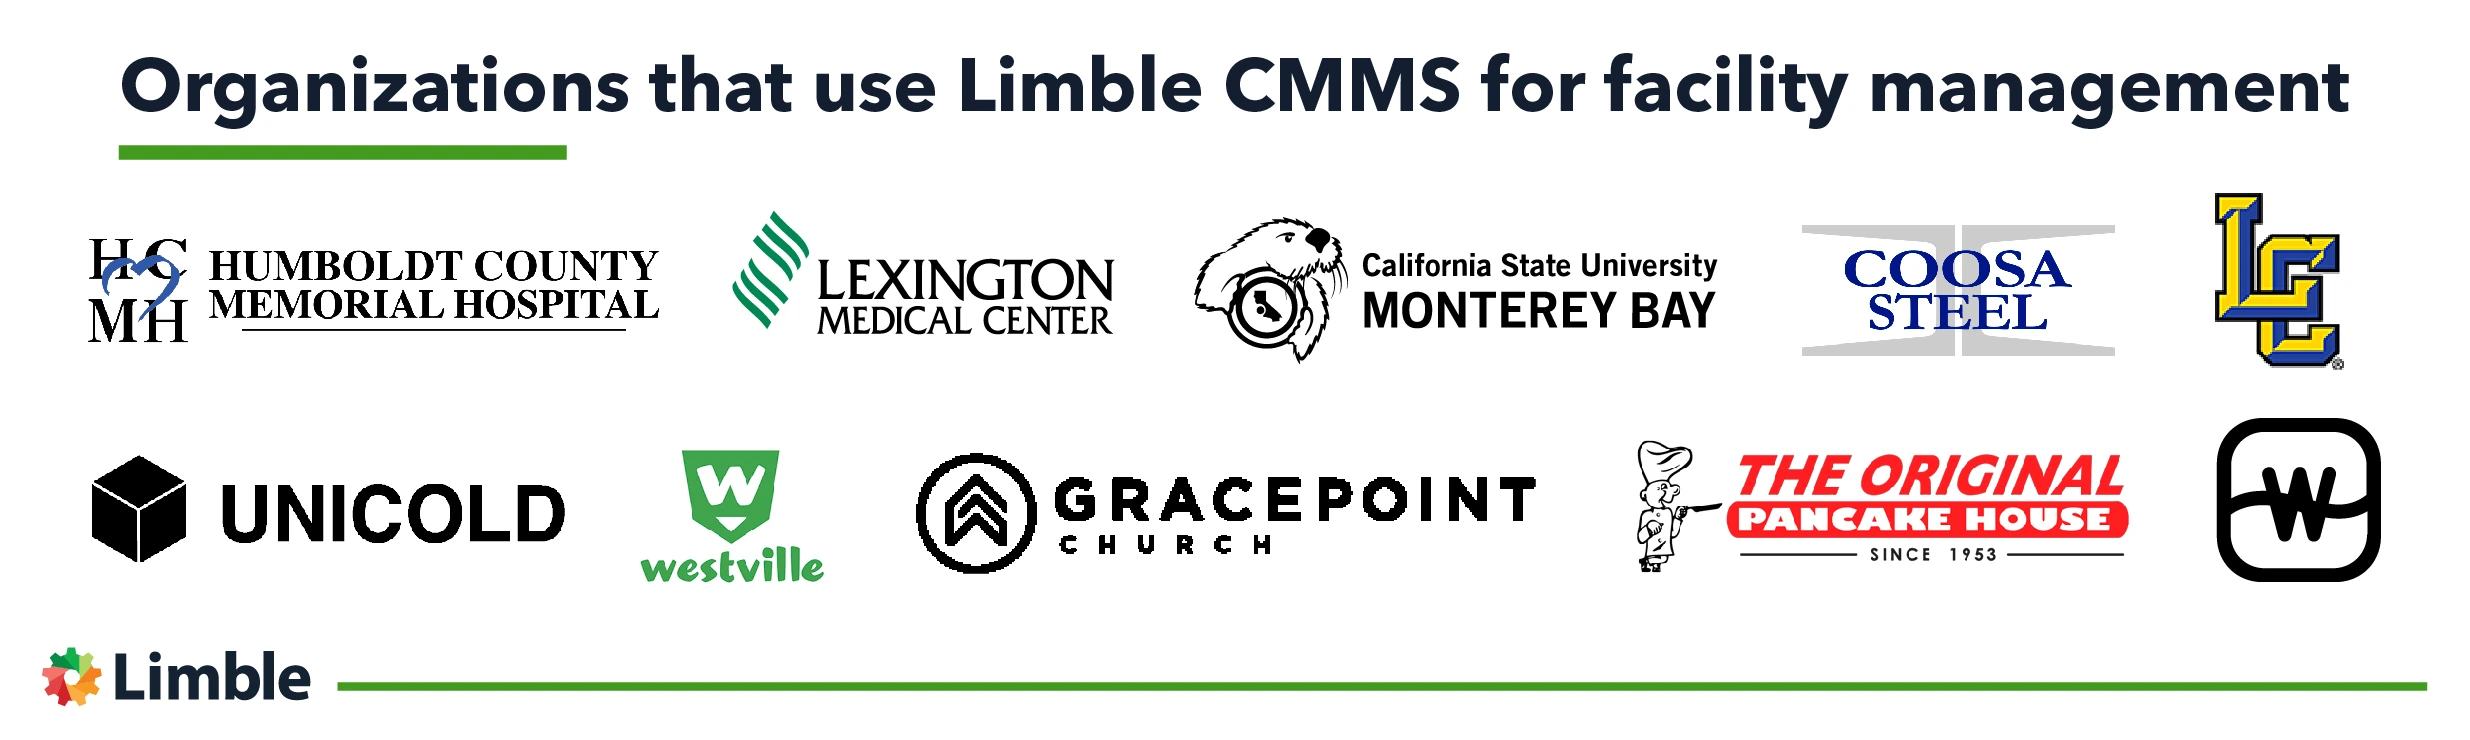 Organizations that use Limble CMMS for facility management